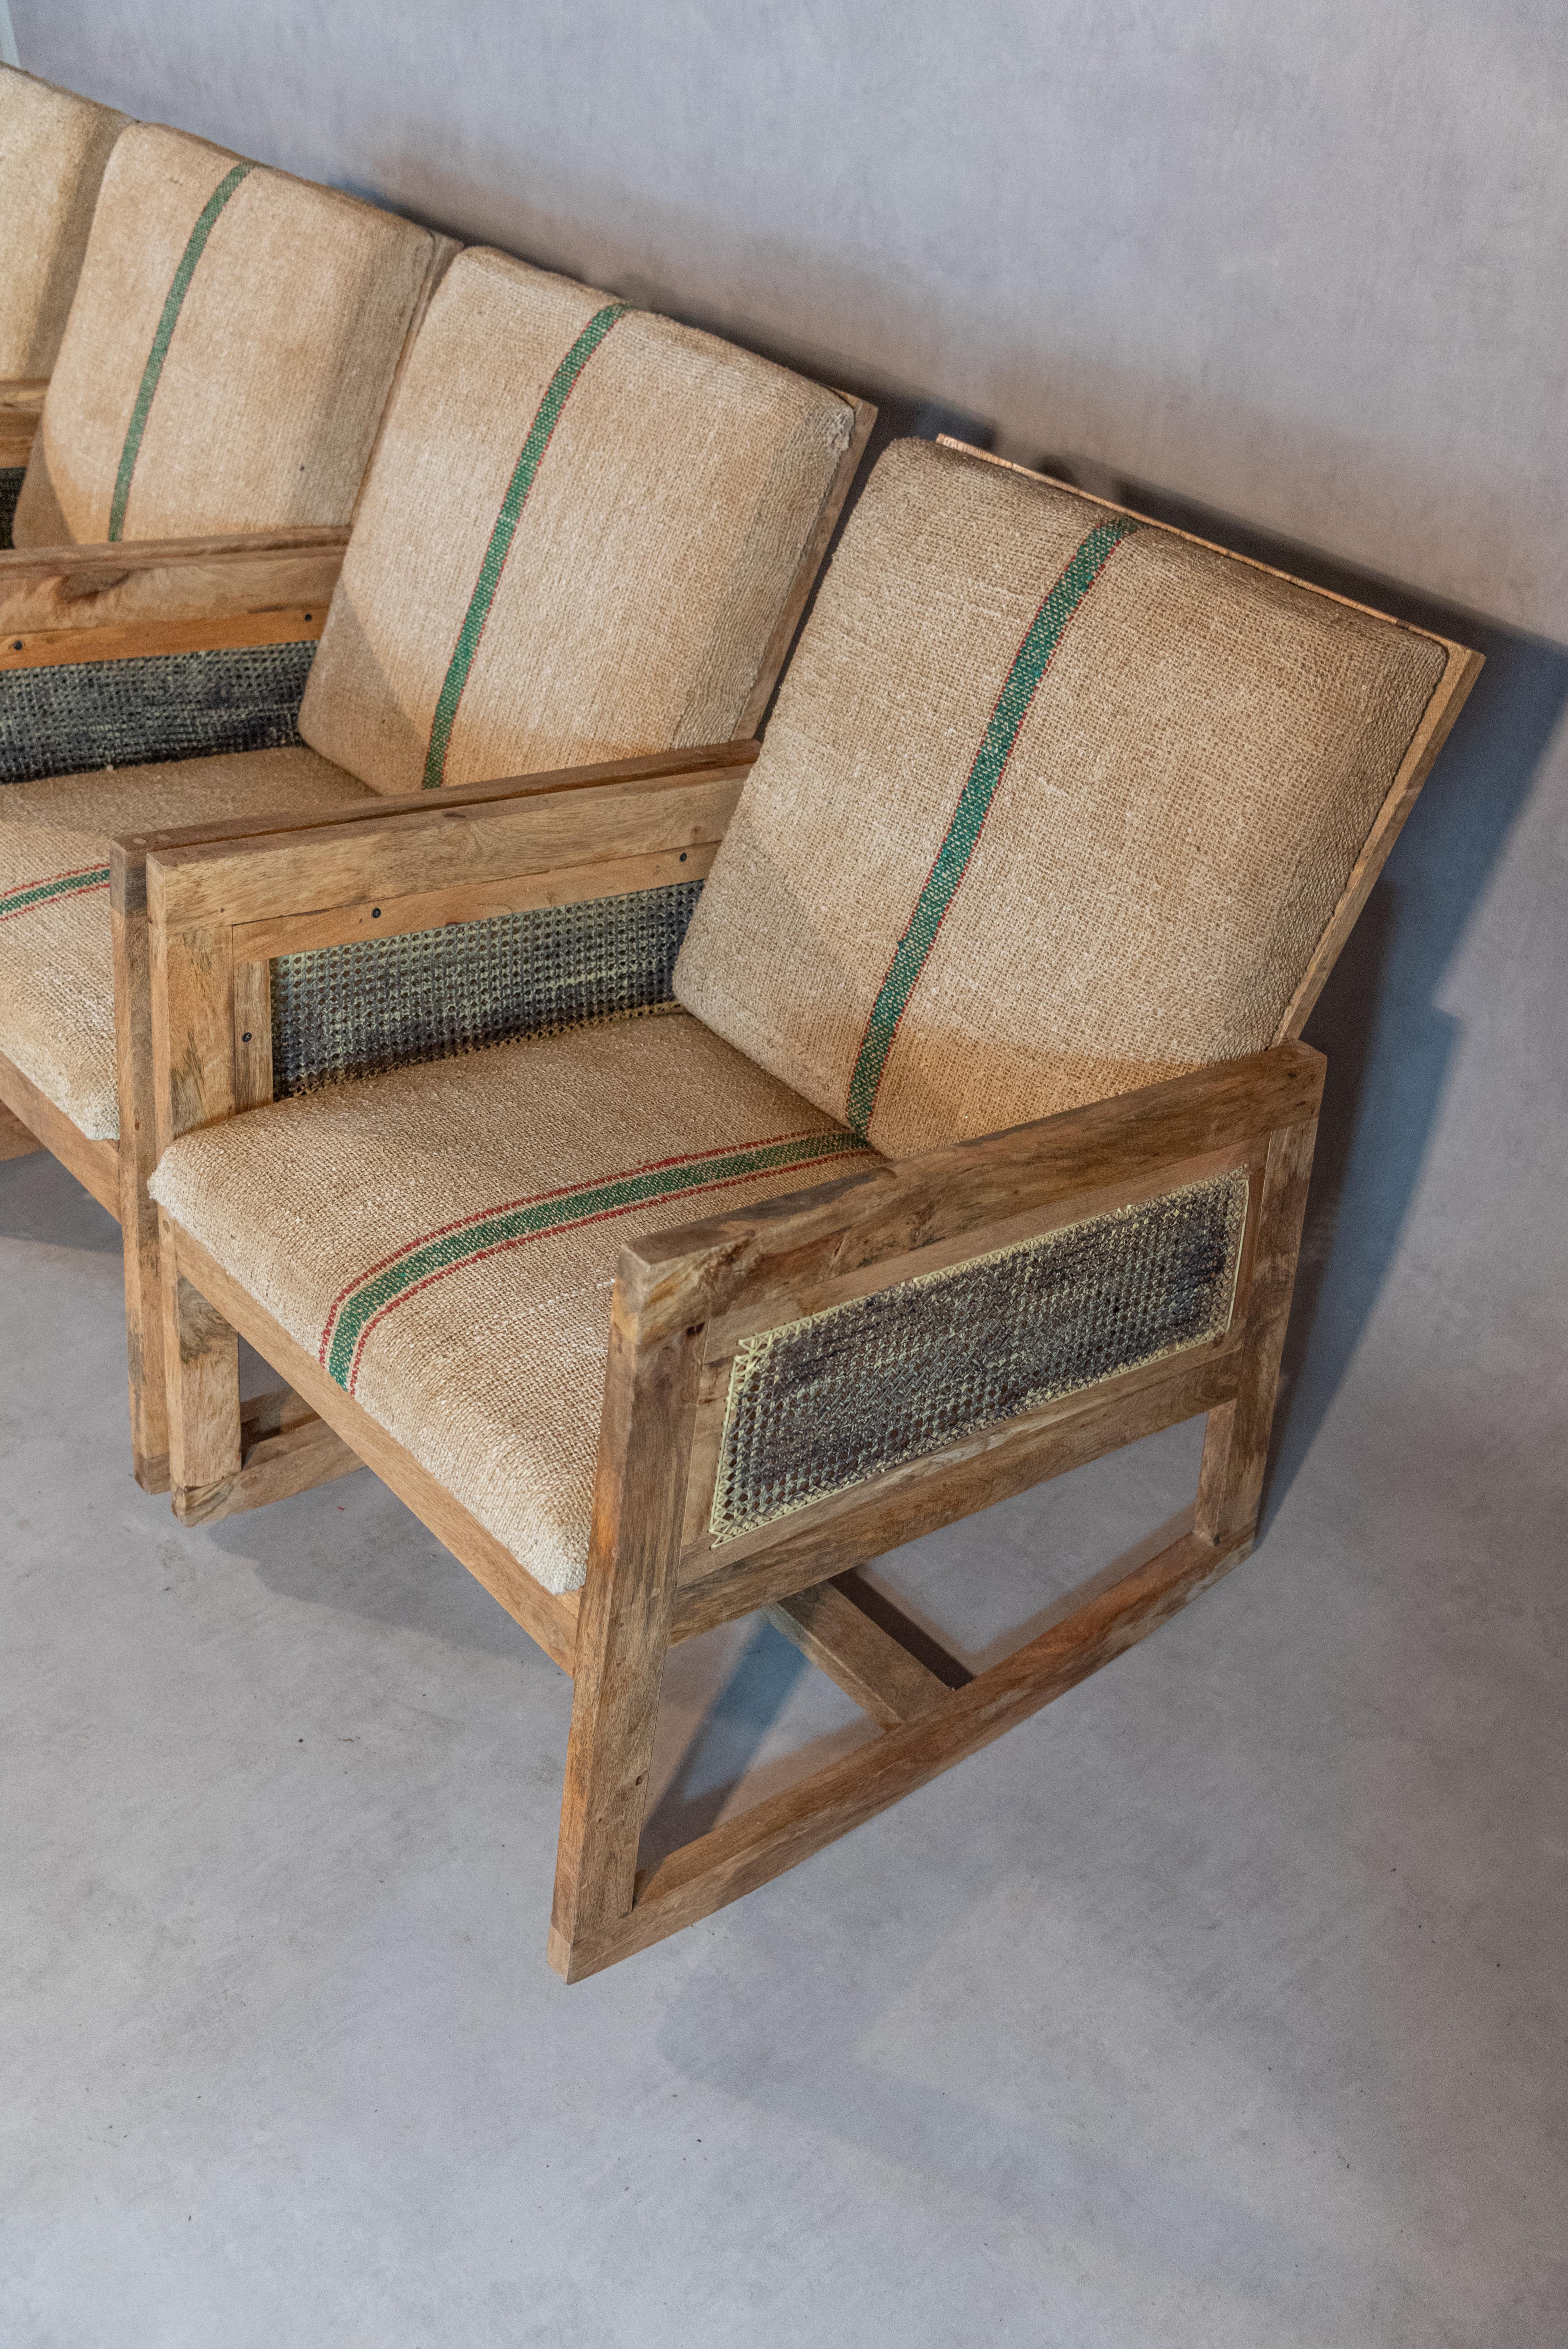 
Introducing a delightful set of four French rocking chairs, each exquisitely crafted from rich mahogany wood. These chairs boast a timeless elegance, blending rustic charm with classic sophistication.

The seating and backrest are upholstered in a